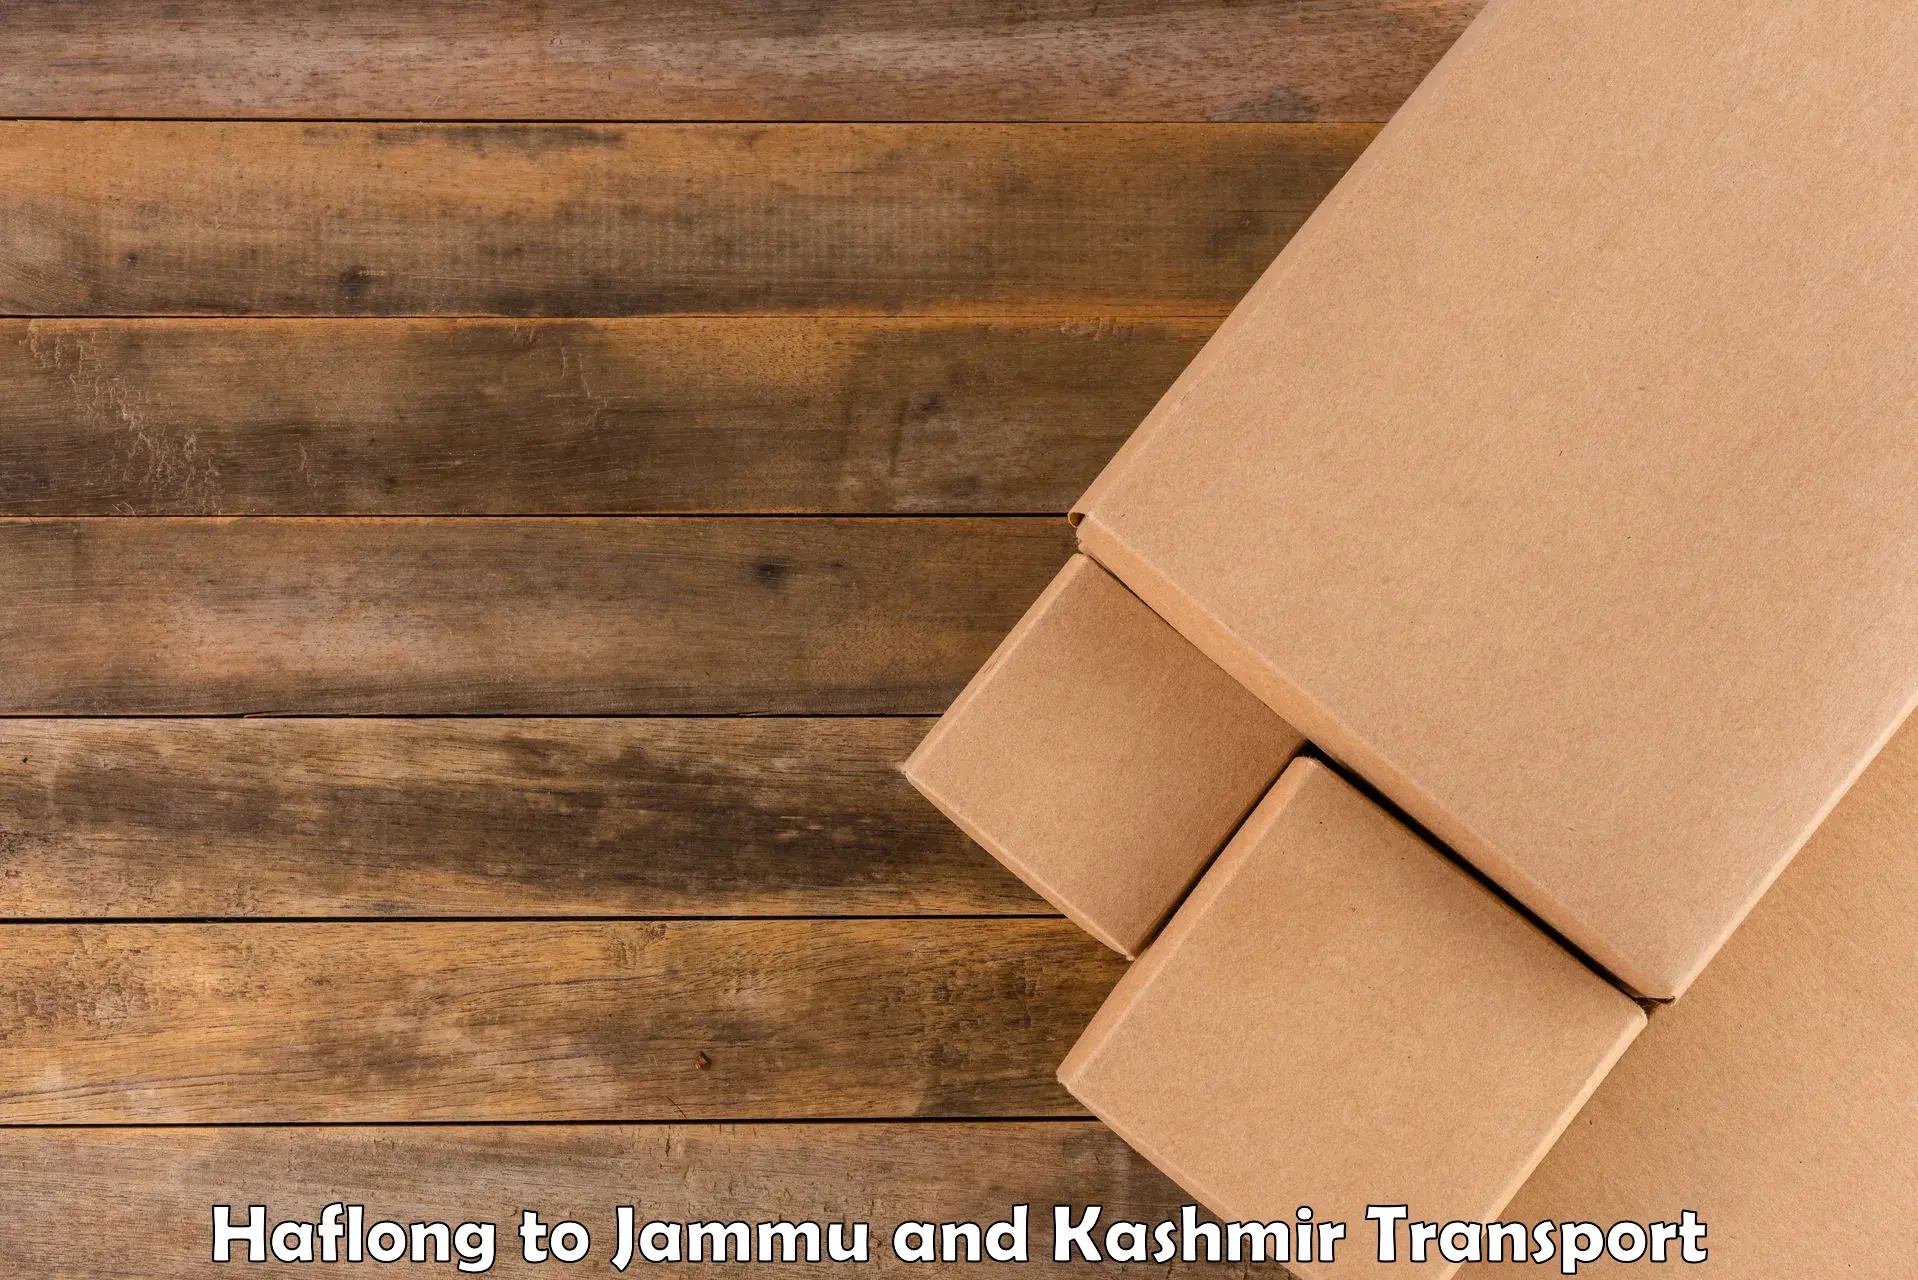 Truck transport companies in India Haflong to Jammu